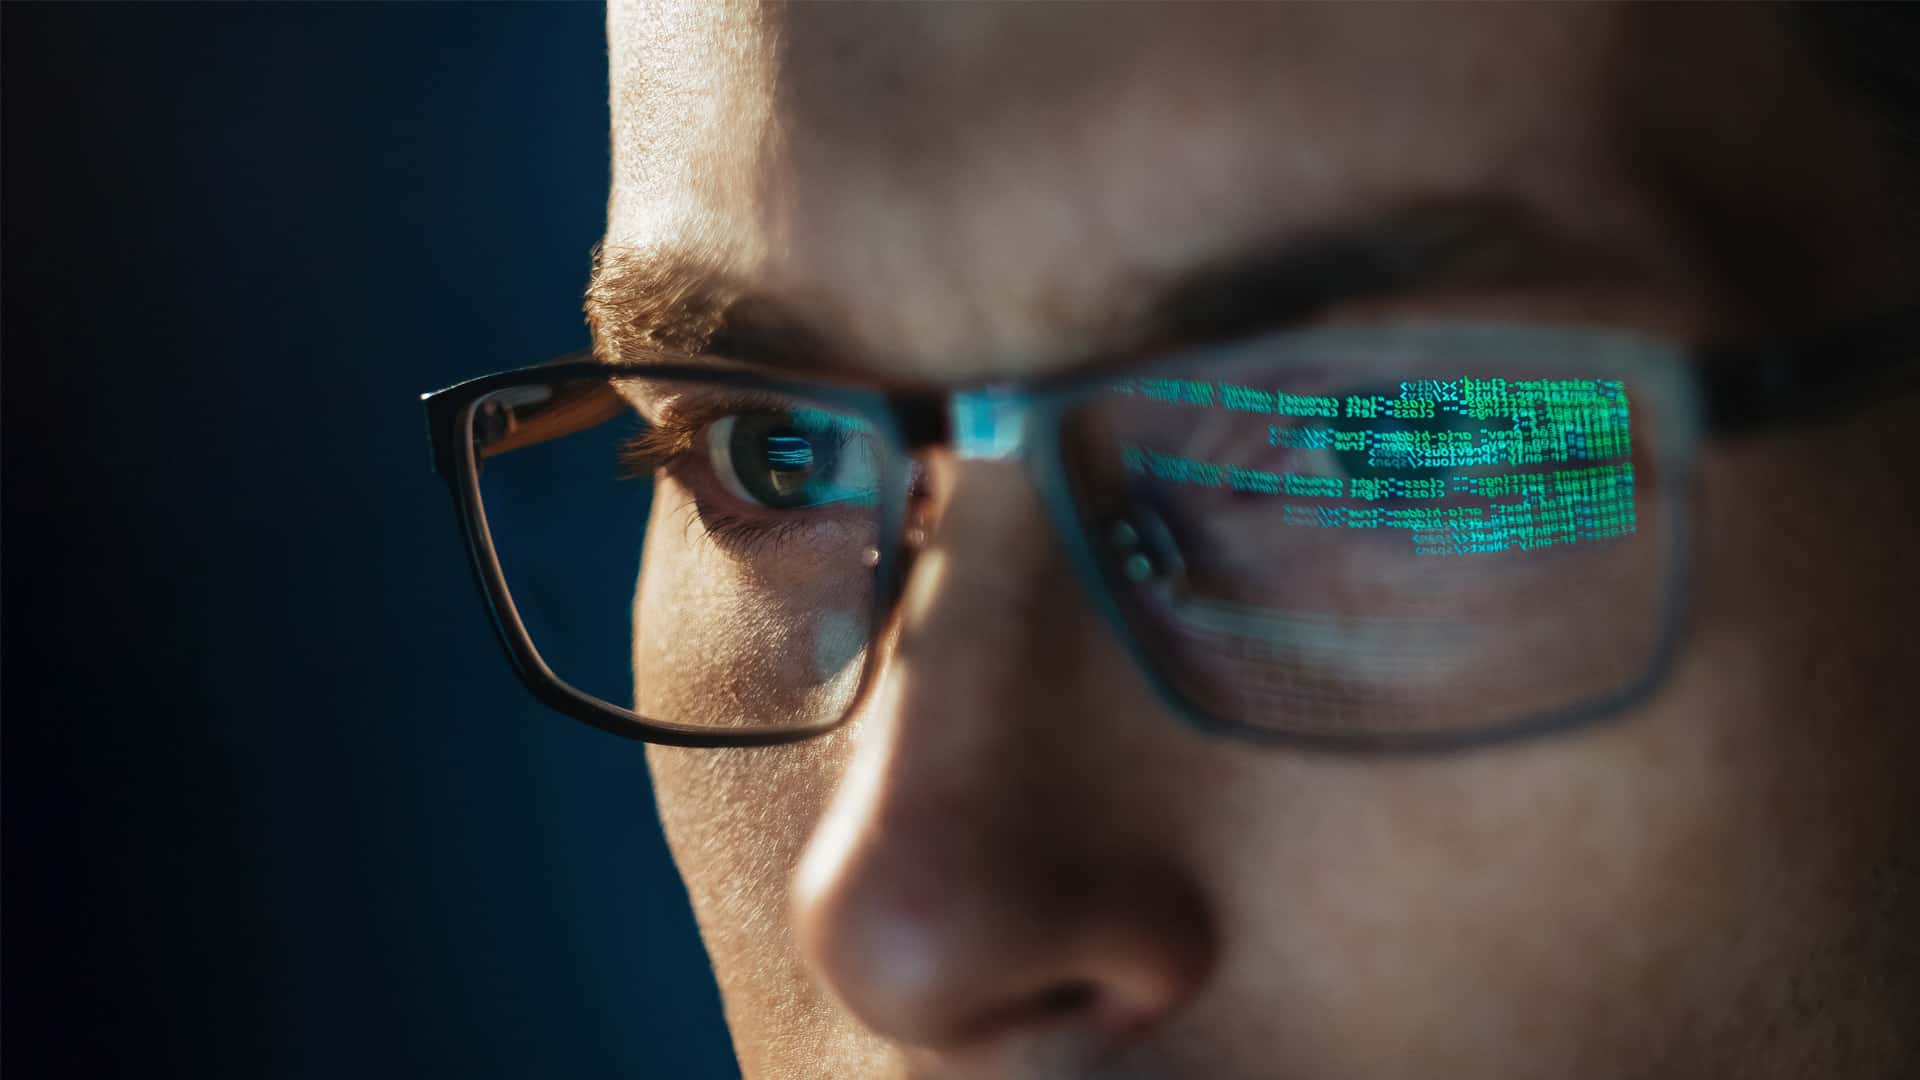 Many reading computer screen reflected in glasses